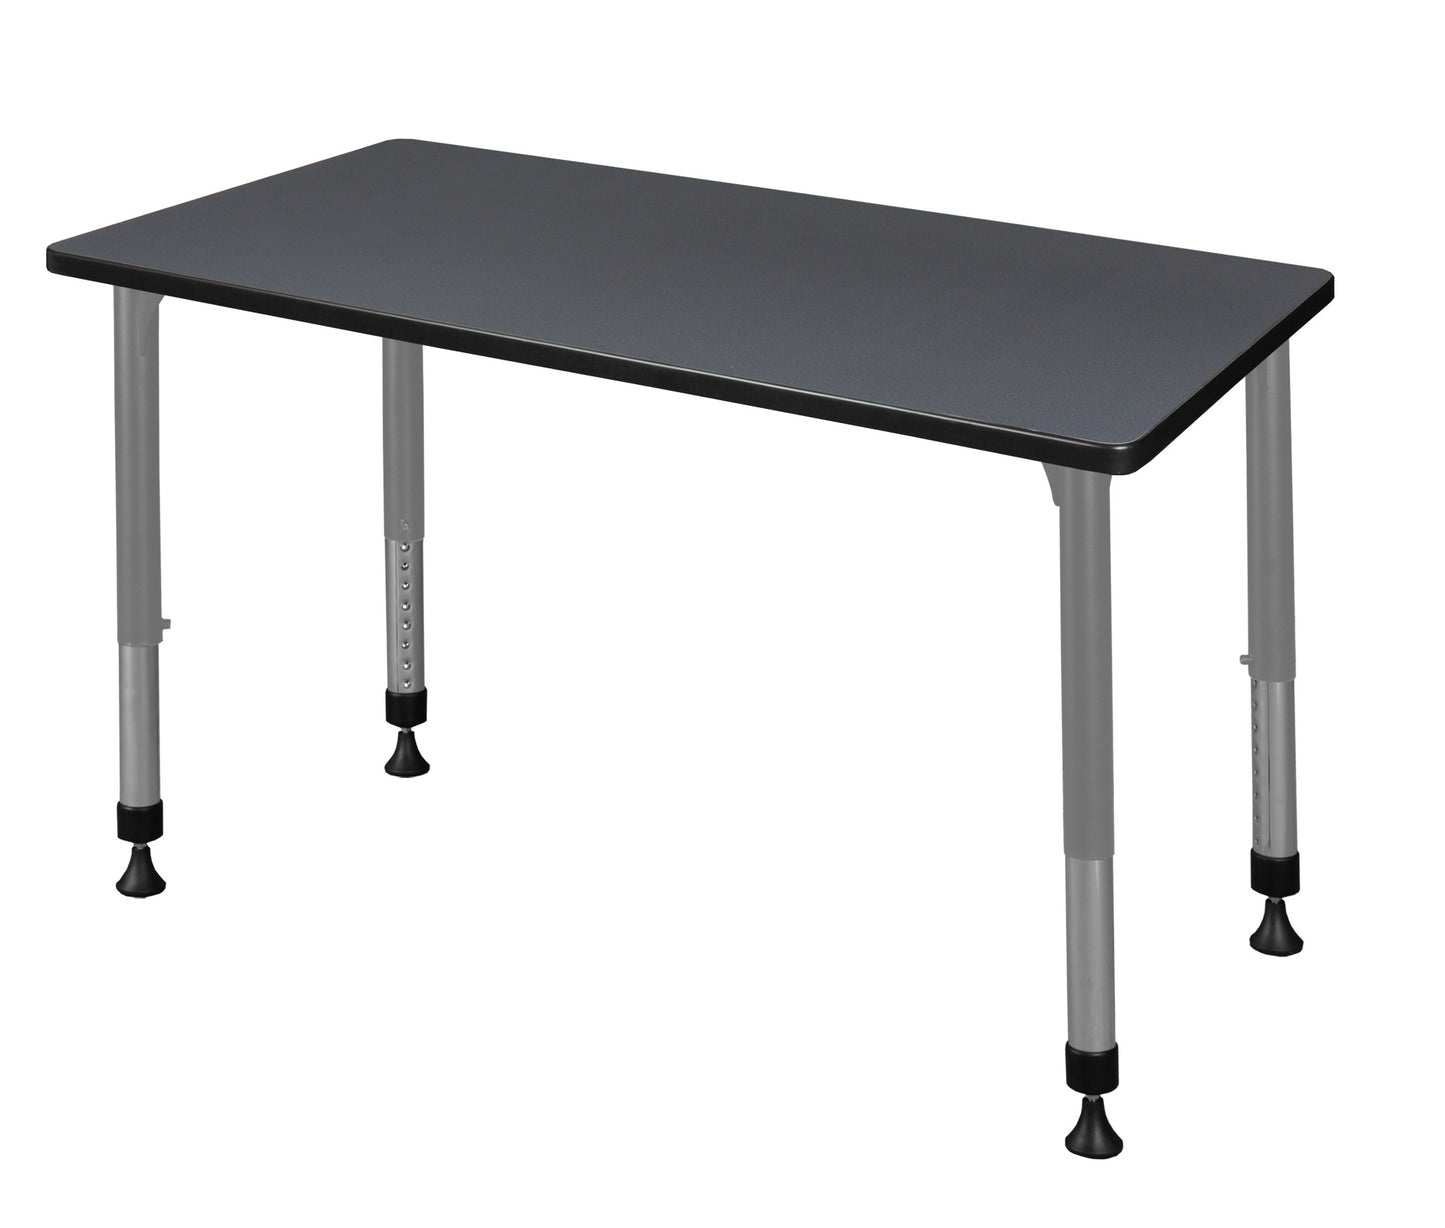 Regency Kee 42 x 24 in. Height Adjustable Mobile Classroom Activity Table